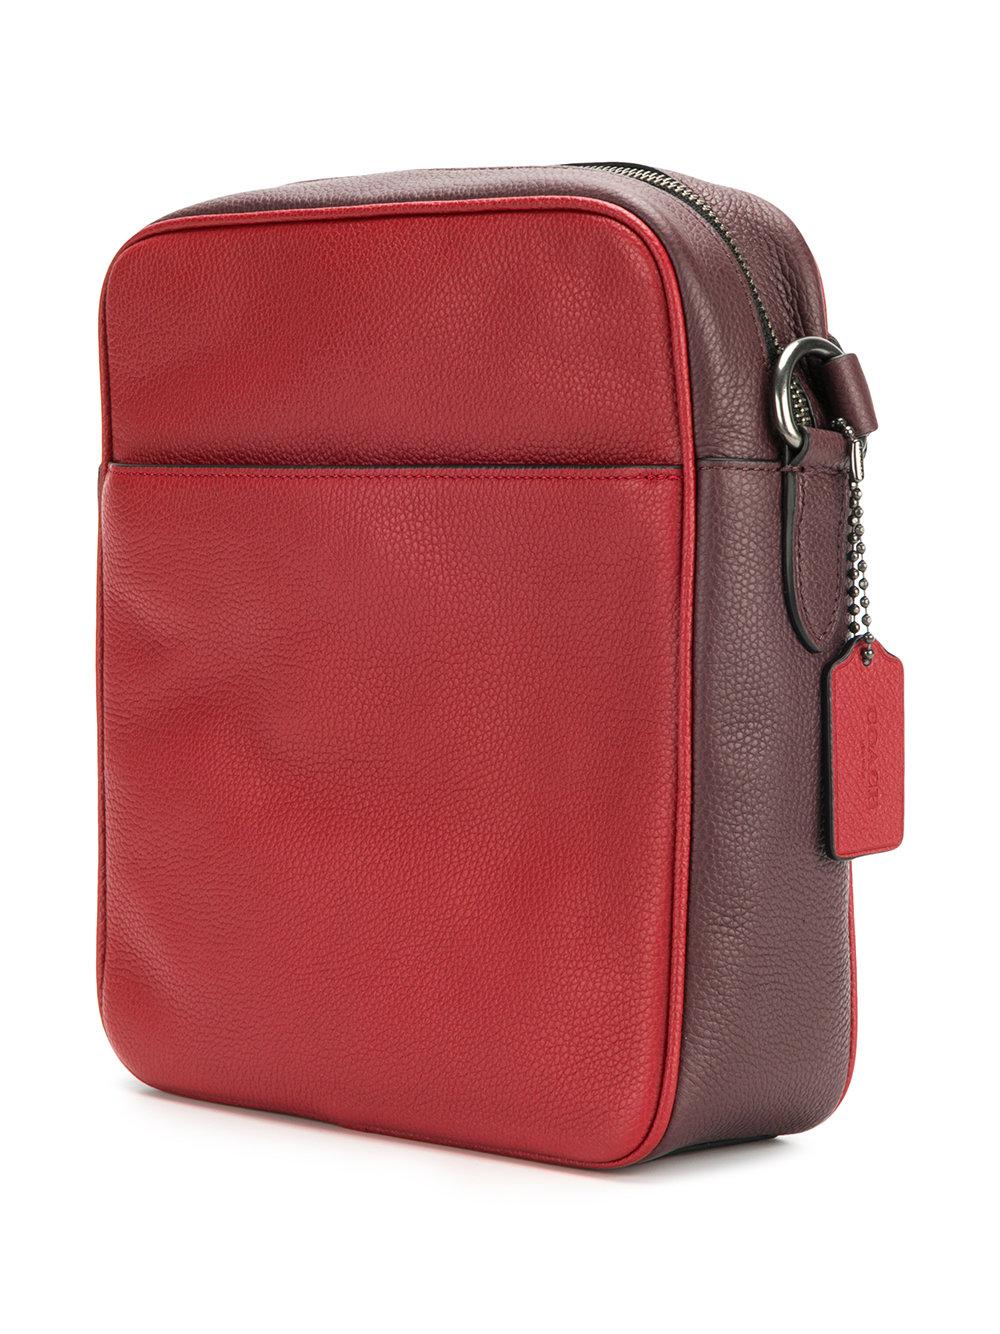 COACH Leather Classic Messenger Bag in Red for Men - Lyst